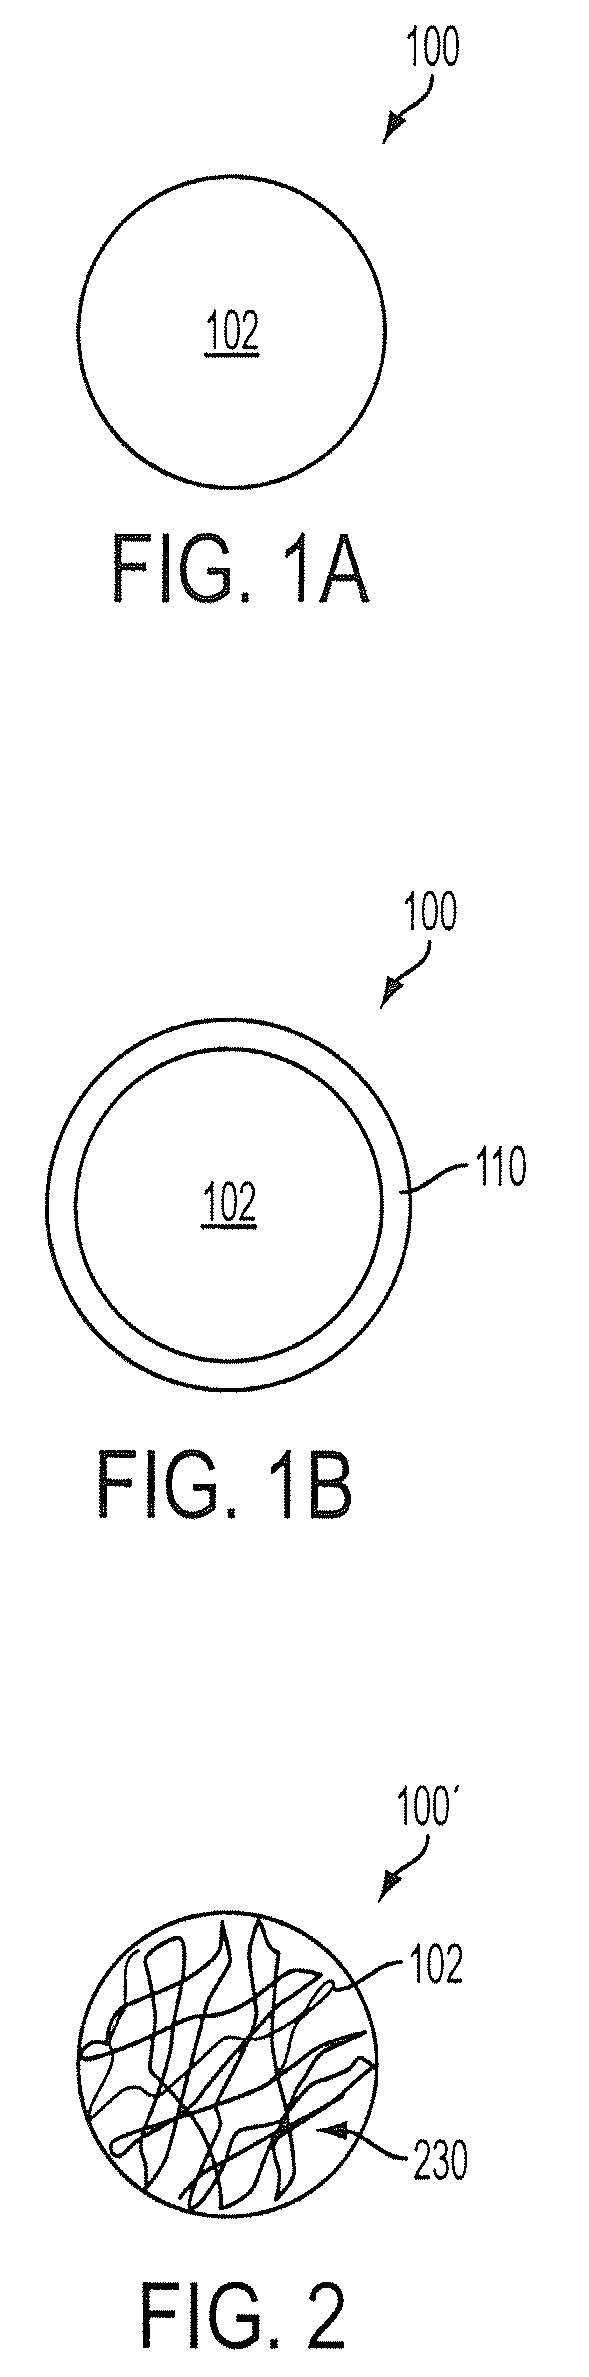 Implant pellets and methods for performing bone augmentation and preservation